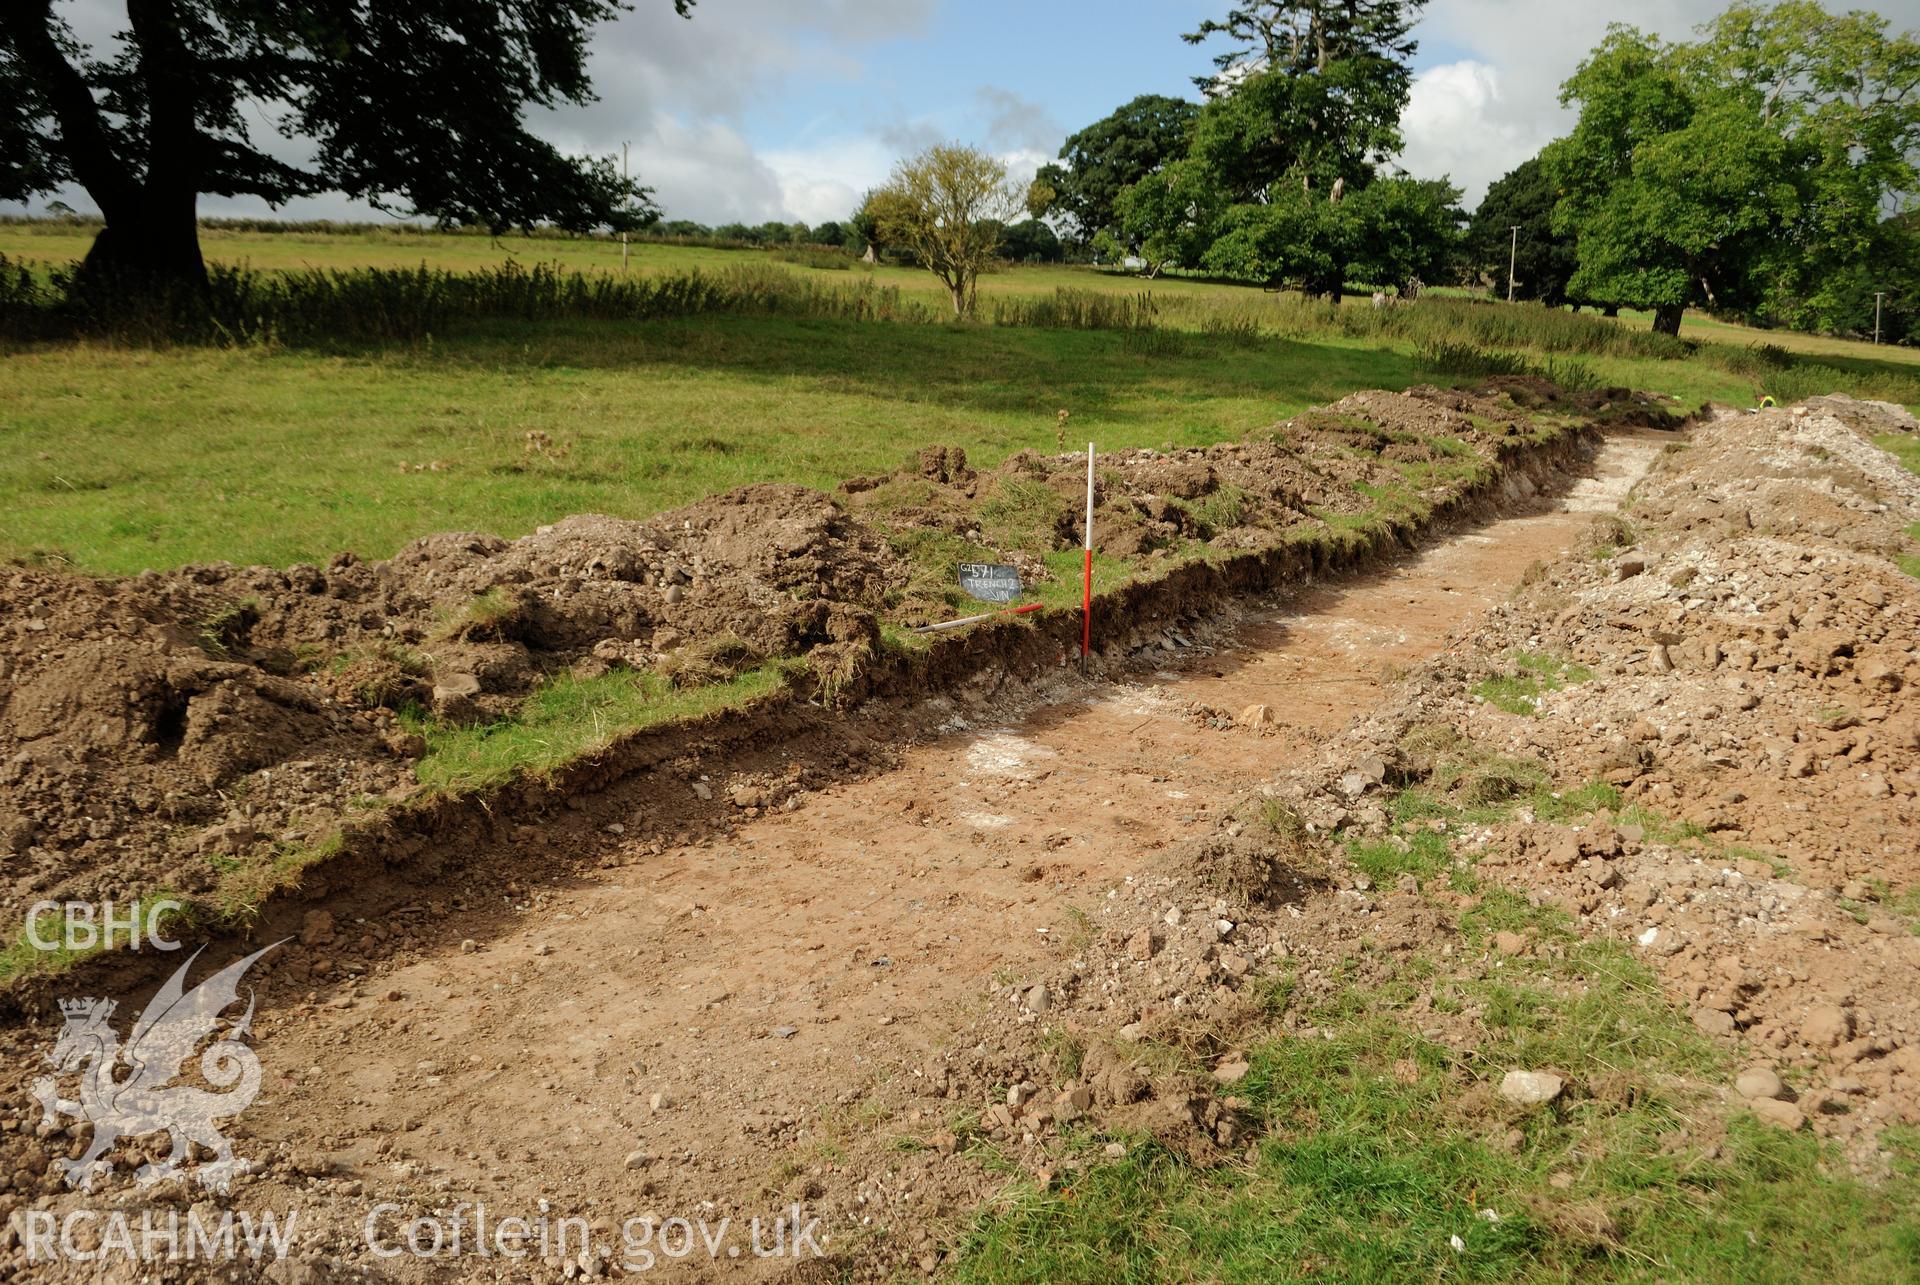 Location shot from the east north east of Trench 2. Photographed during archaeological evaluation of Kinmel Park, Abergele, conducted by Gwynedd Archaeological Trust on 24th August 2018. Project no. 2571.